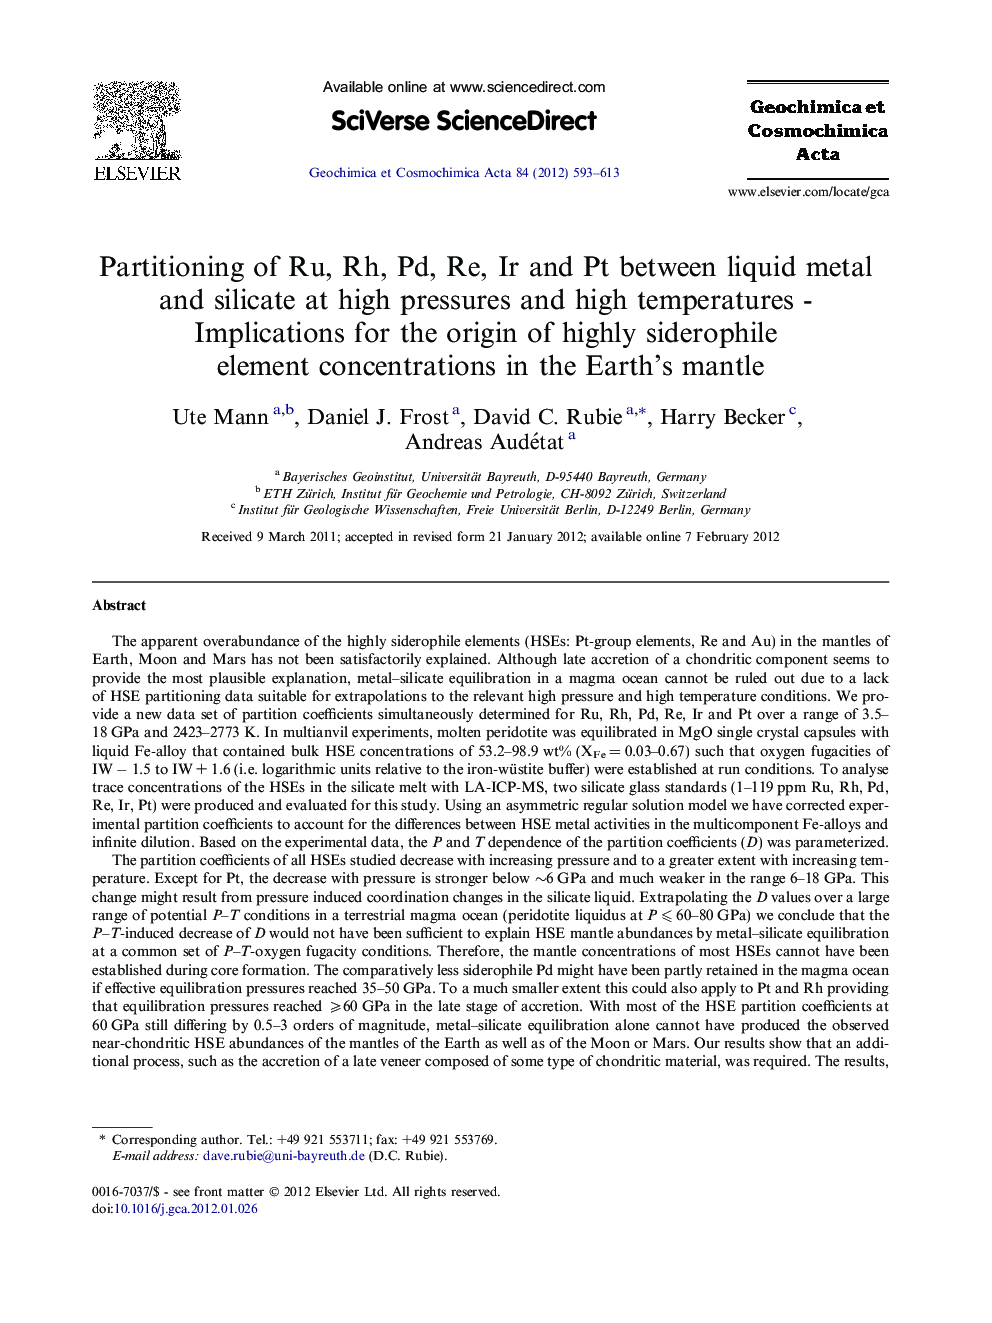 Partitioning of Ru, Rh, Pd, Re, Ir and Pt between liquid metal and silicate at high pressures and high temperatures - Implications for the origin of highly siderophile element concentrations in the Earth’s mantle